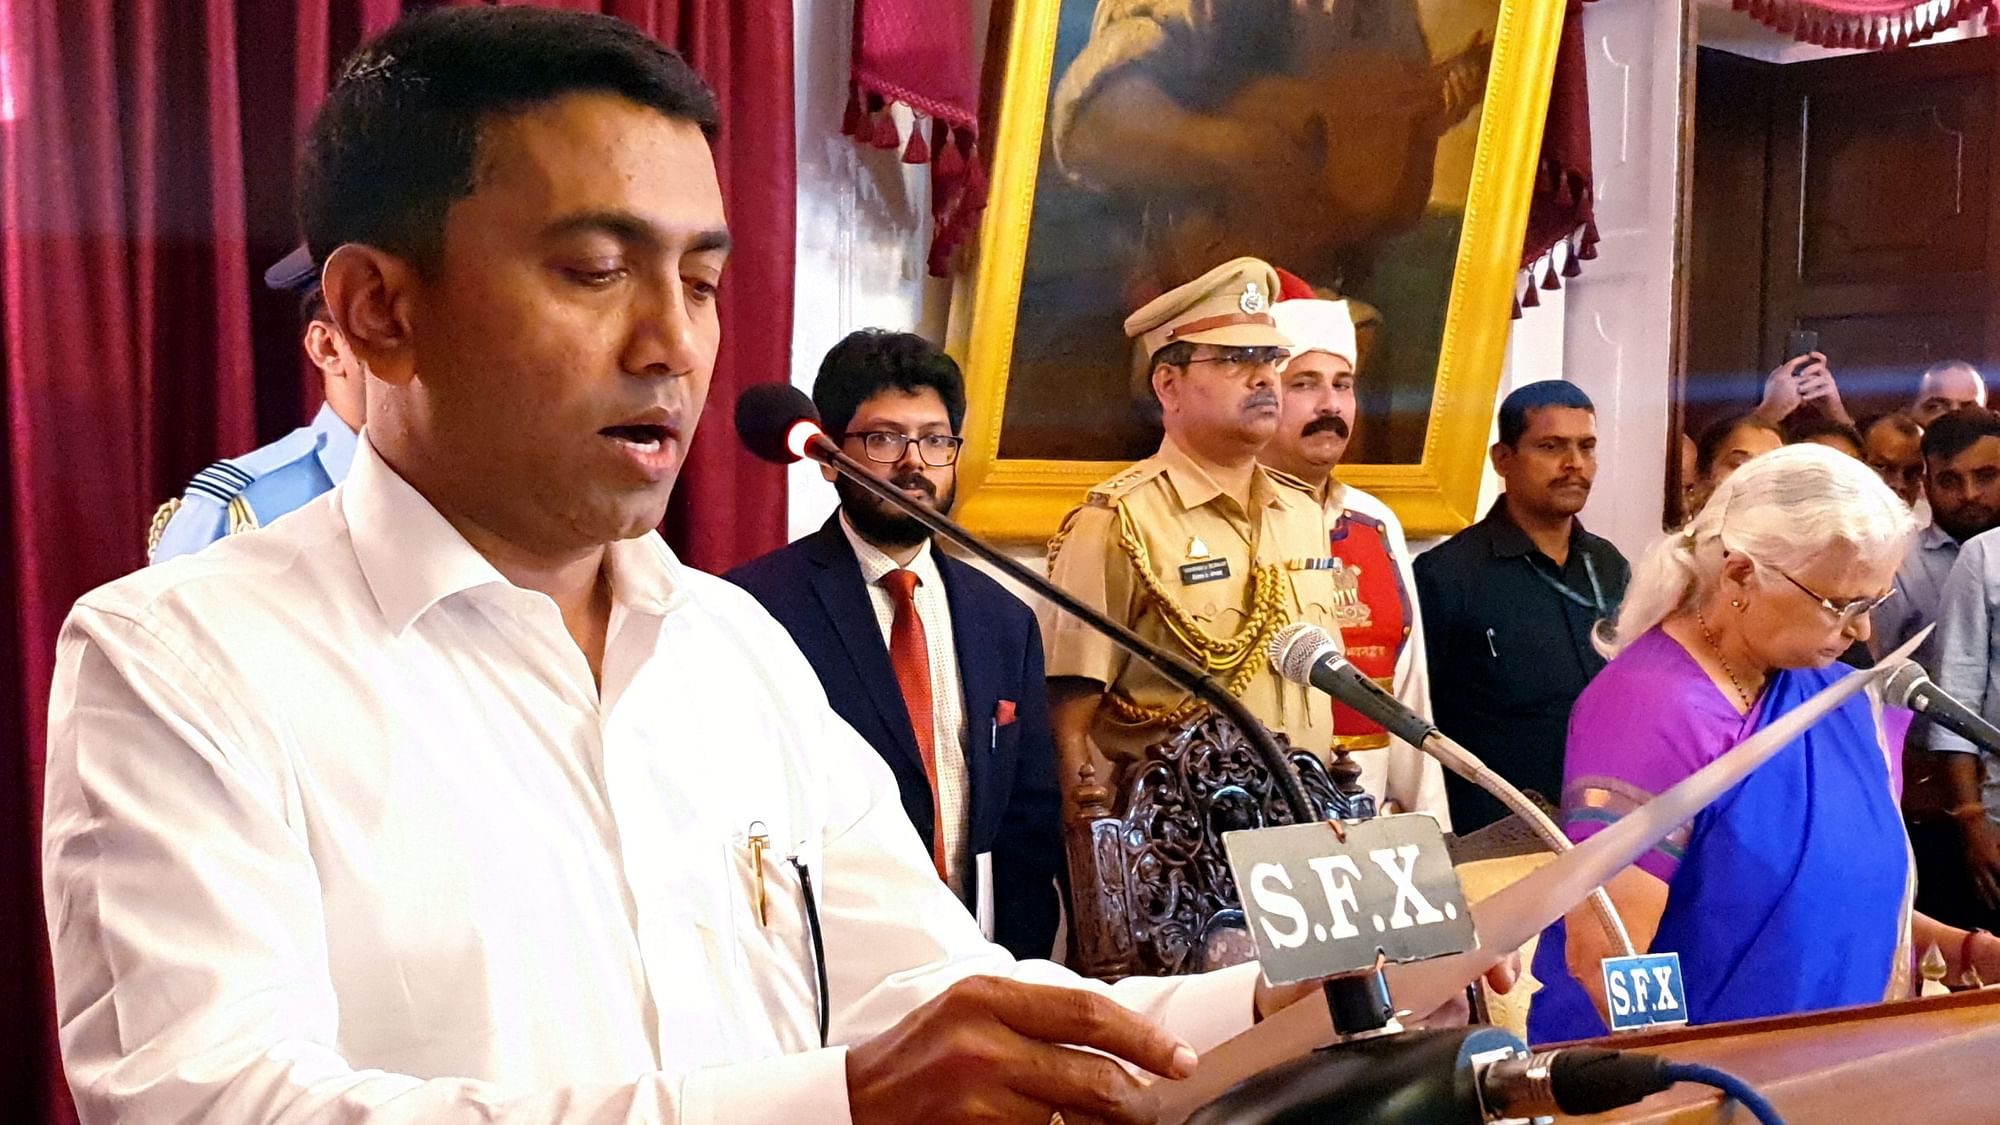 Pramod Sawant was sworn in at 2 am on Tuesday, 19 March, amidst a political frenzy that broke out in the state following the demise of Manohar Parrikar.